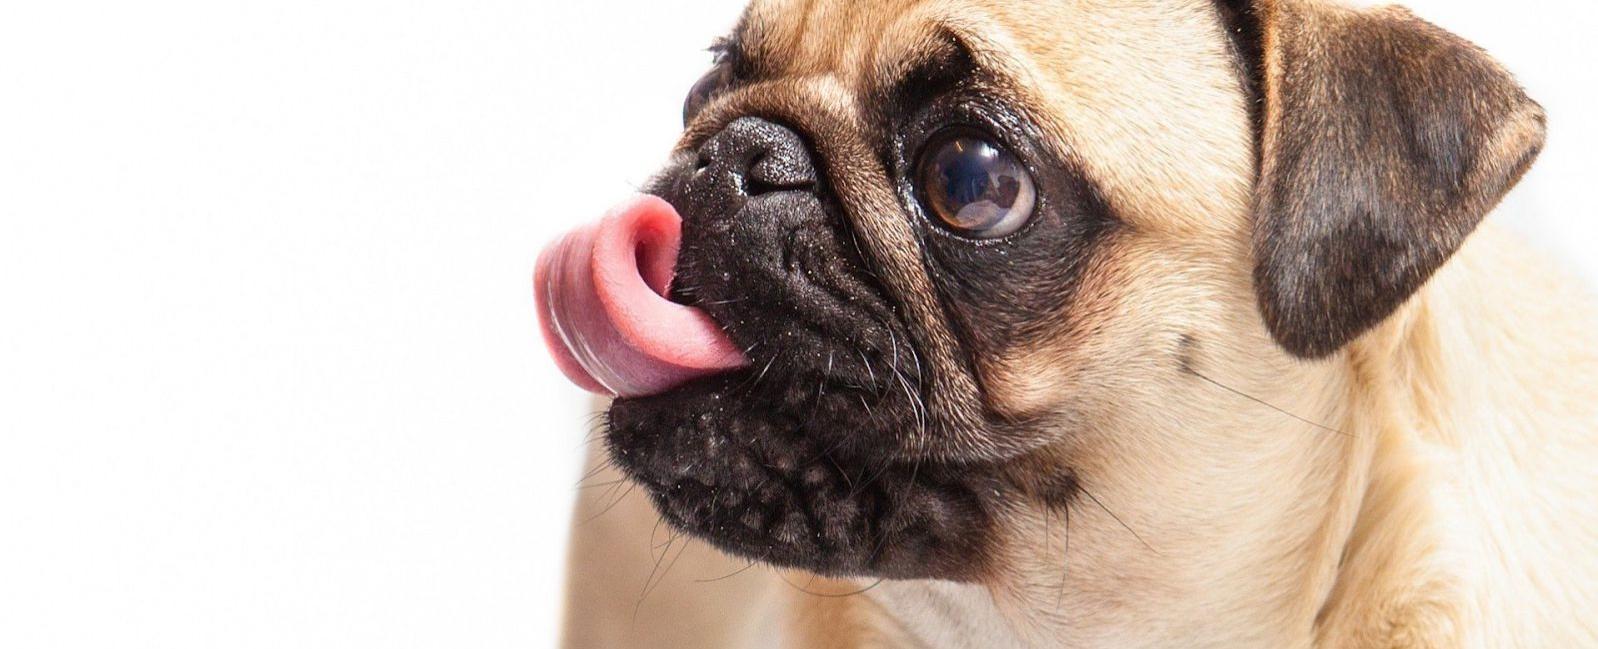 Why Do Dogs Lick Ears?